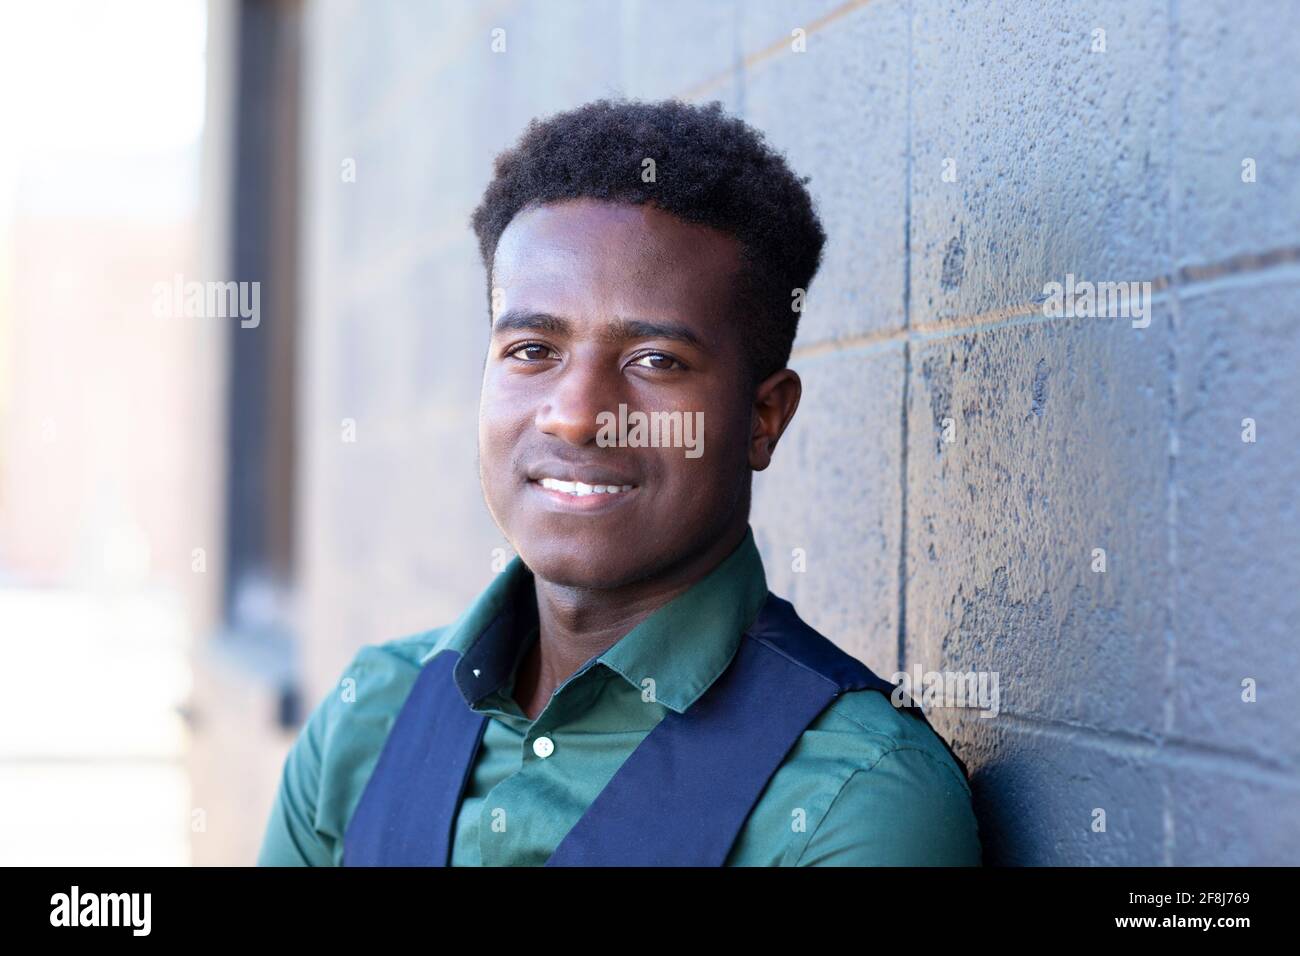 A handsome smiling young black man leans against a gray concrete block wall Stock Photo